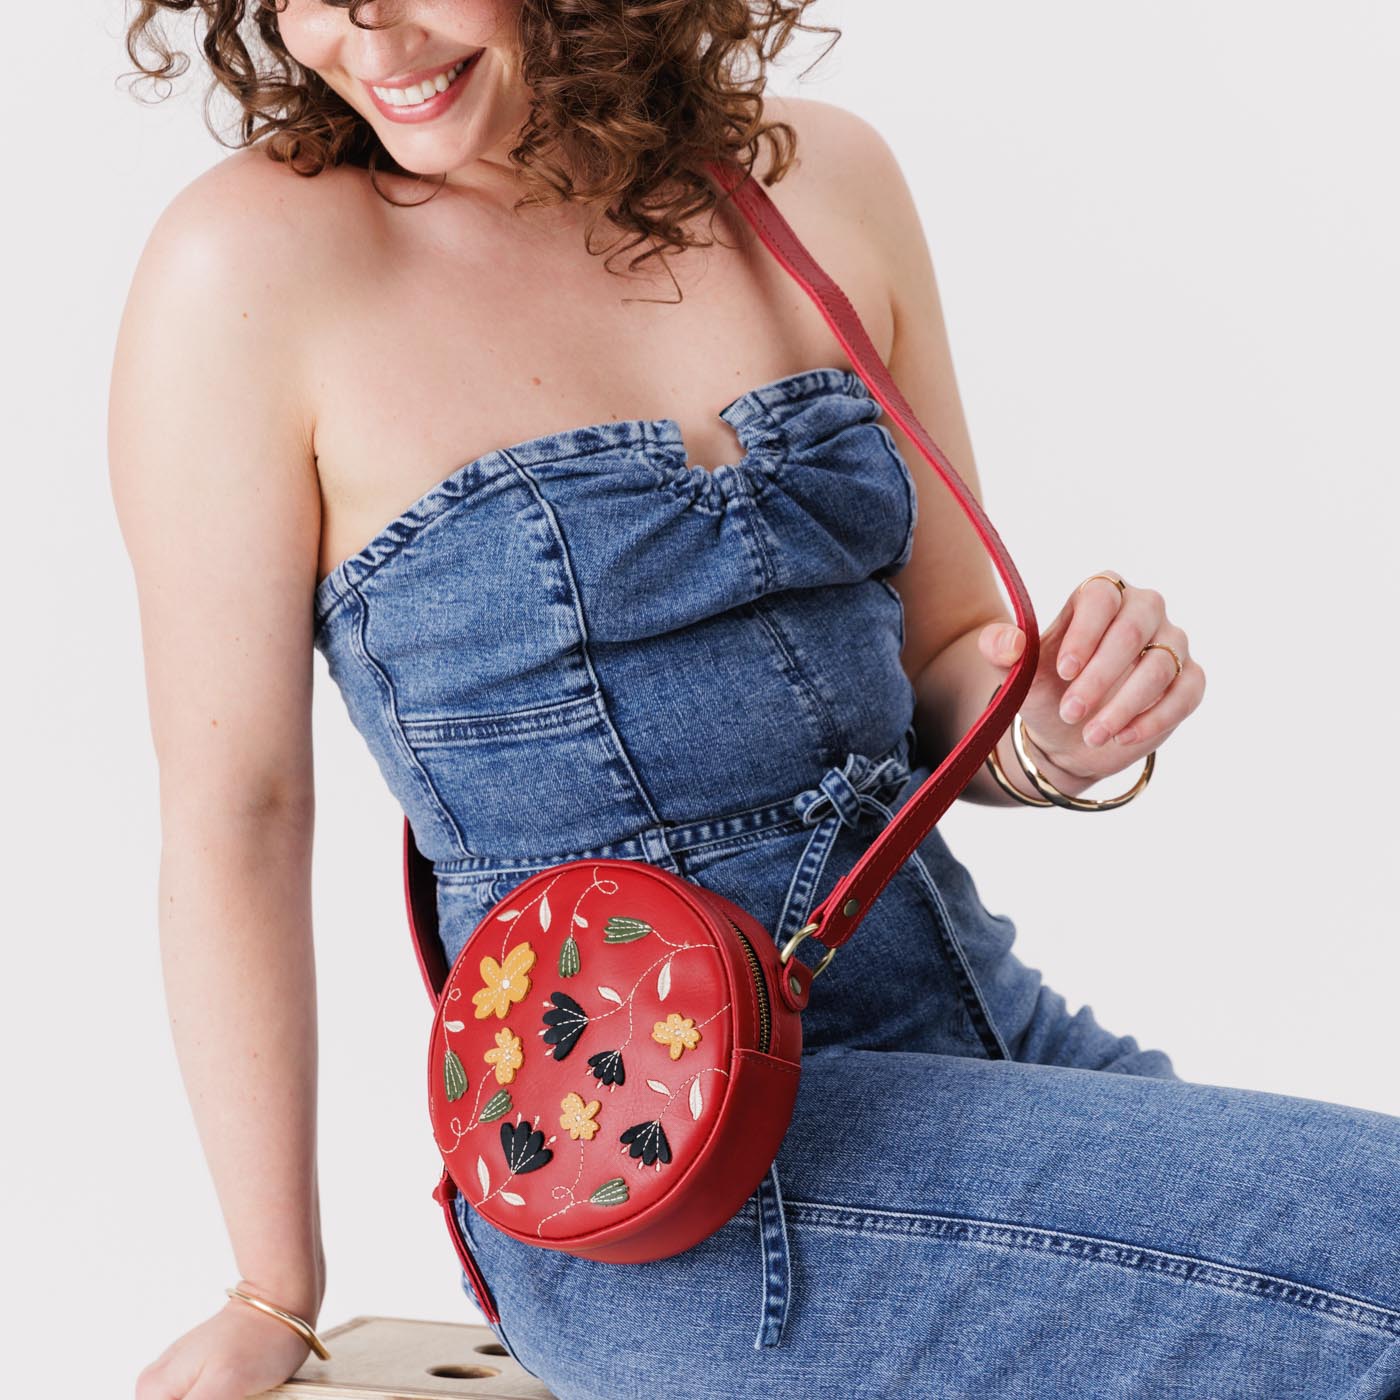 Folklore Ruby*Small | Circle shaped crossbody bag with embroidered flower design